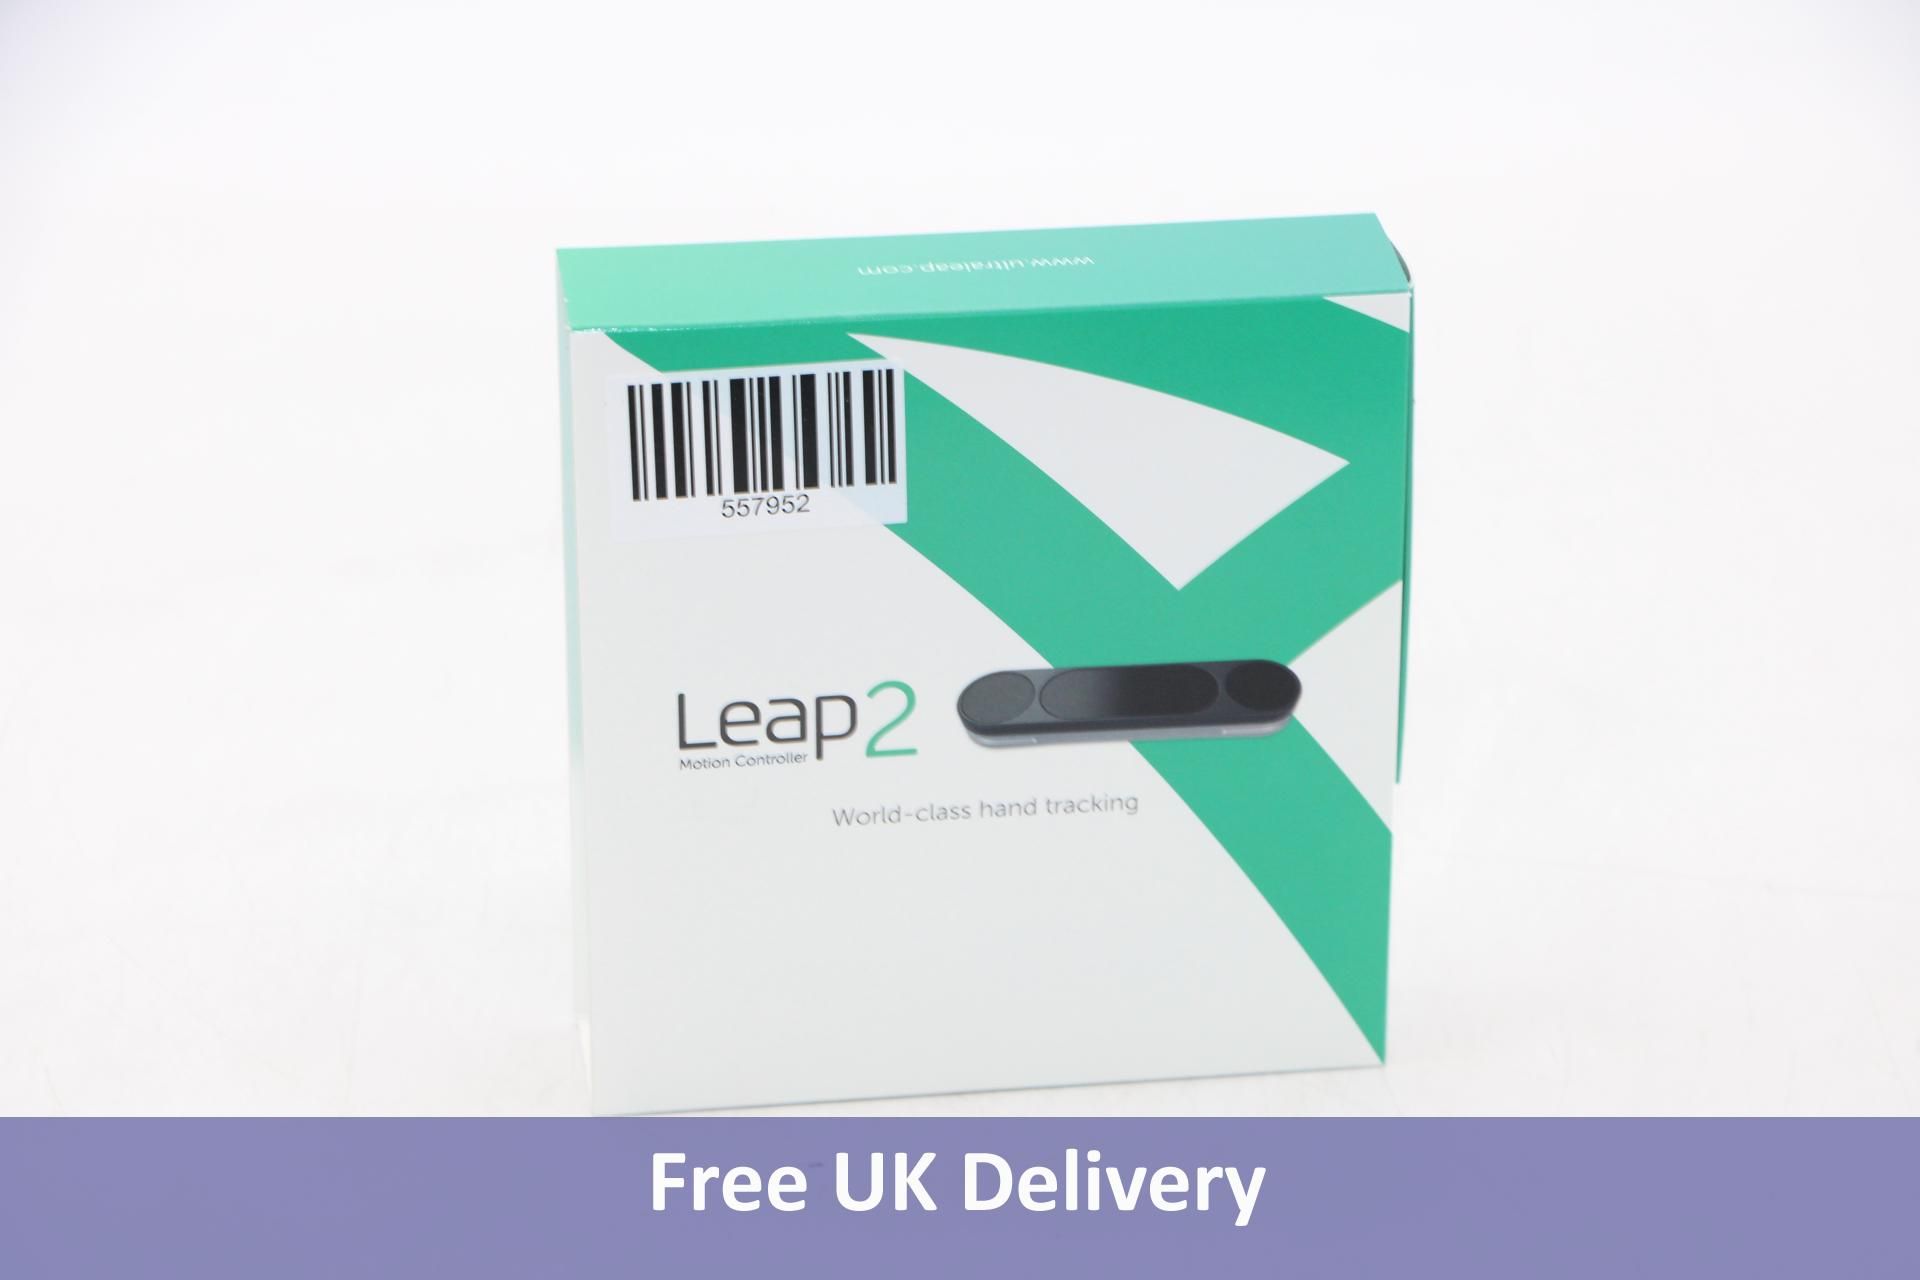 Five Ultraleap Leap Motion Controller 2. New, sealed. Total RRP £715 - Image 5 of 5